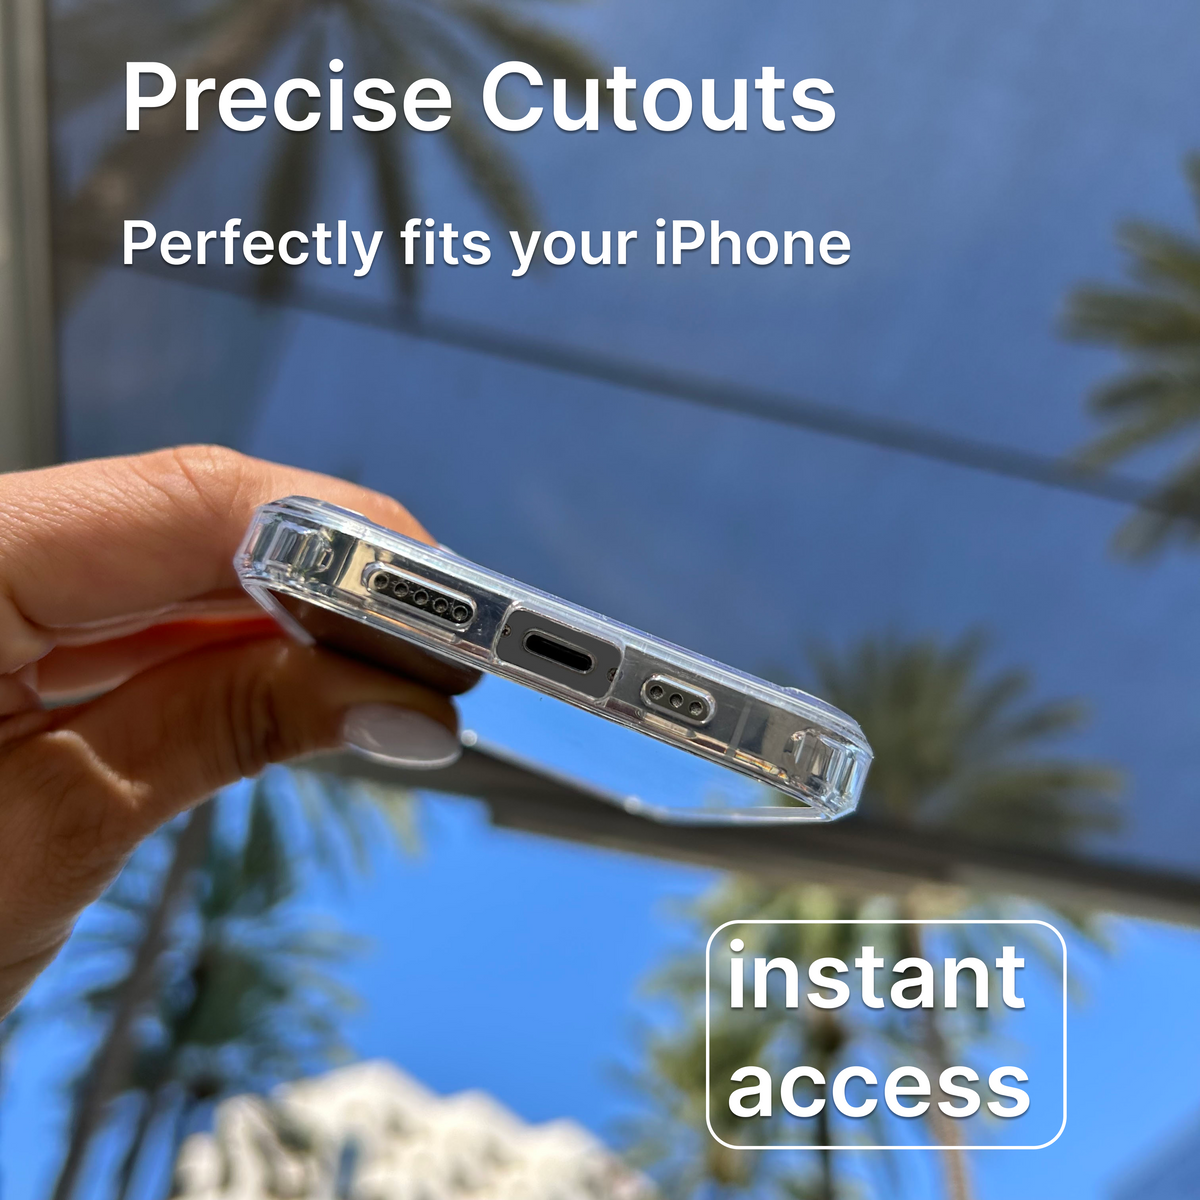 Pure Clear iPhone Case - iPhone 11 Pro Max